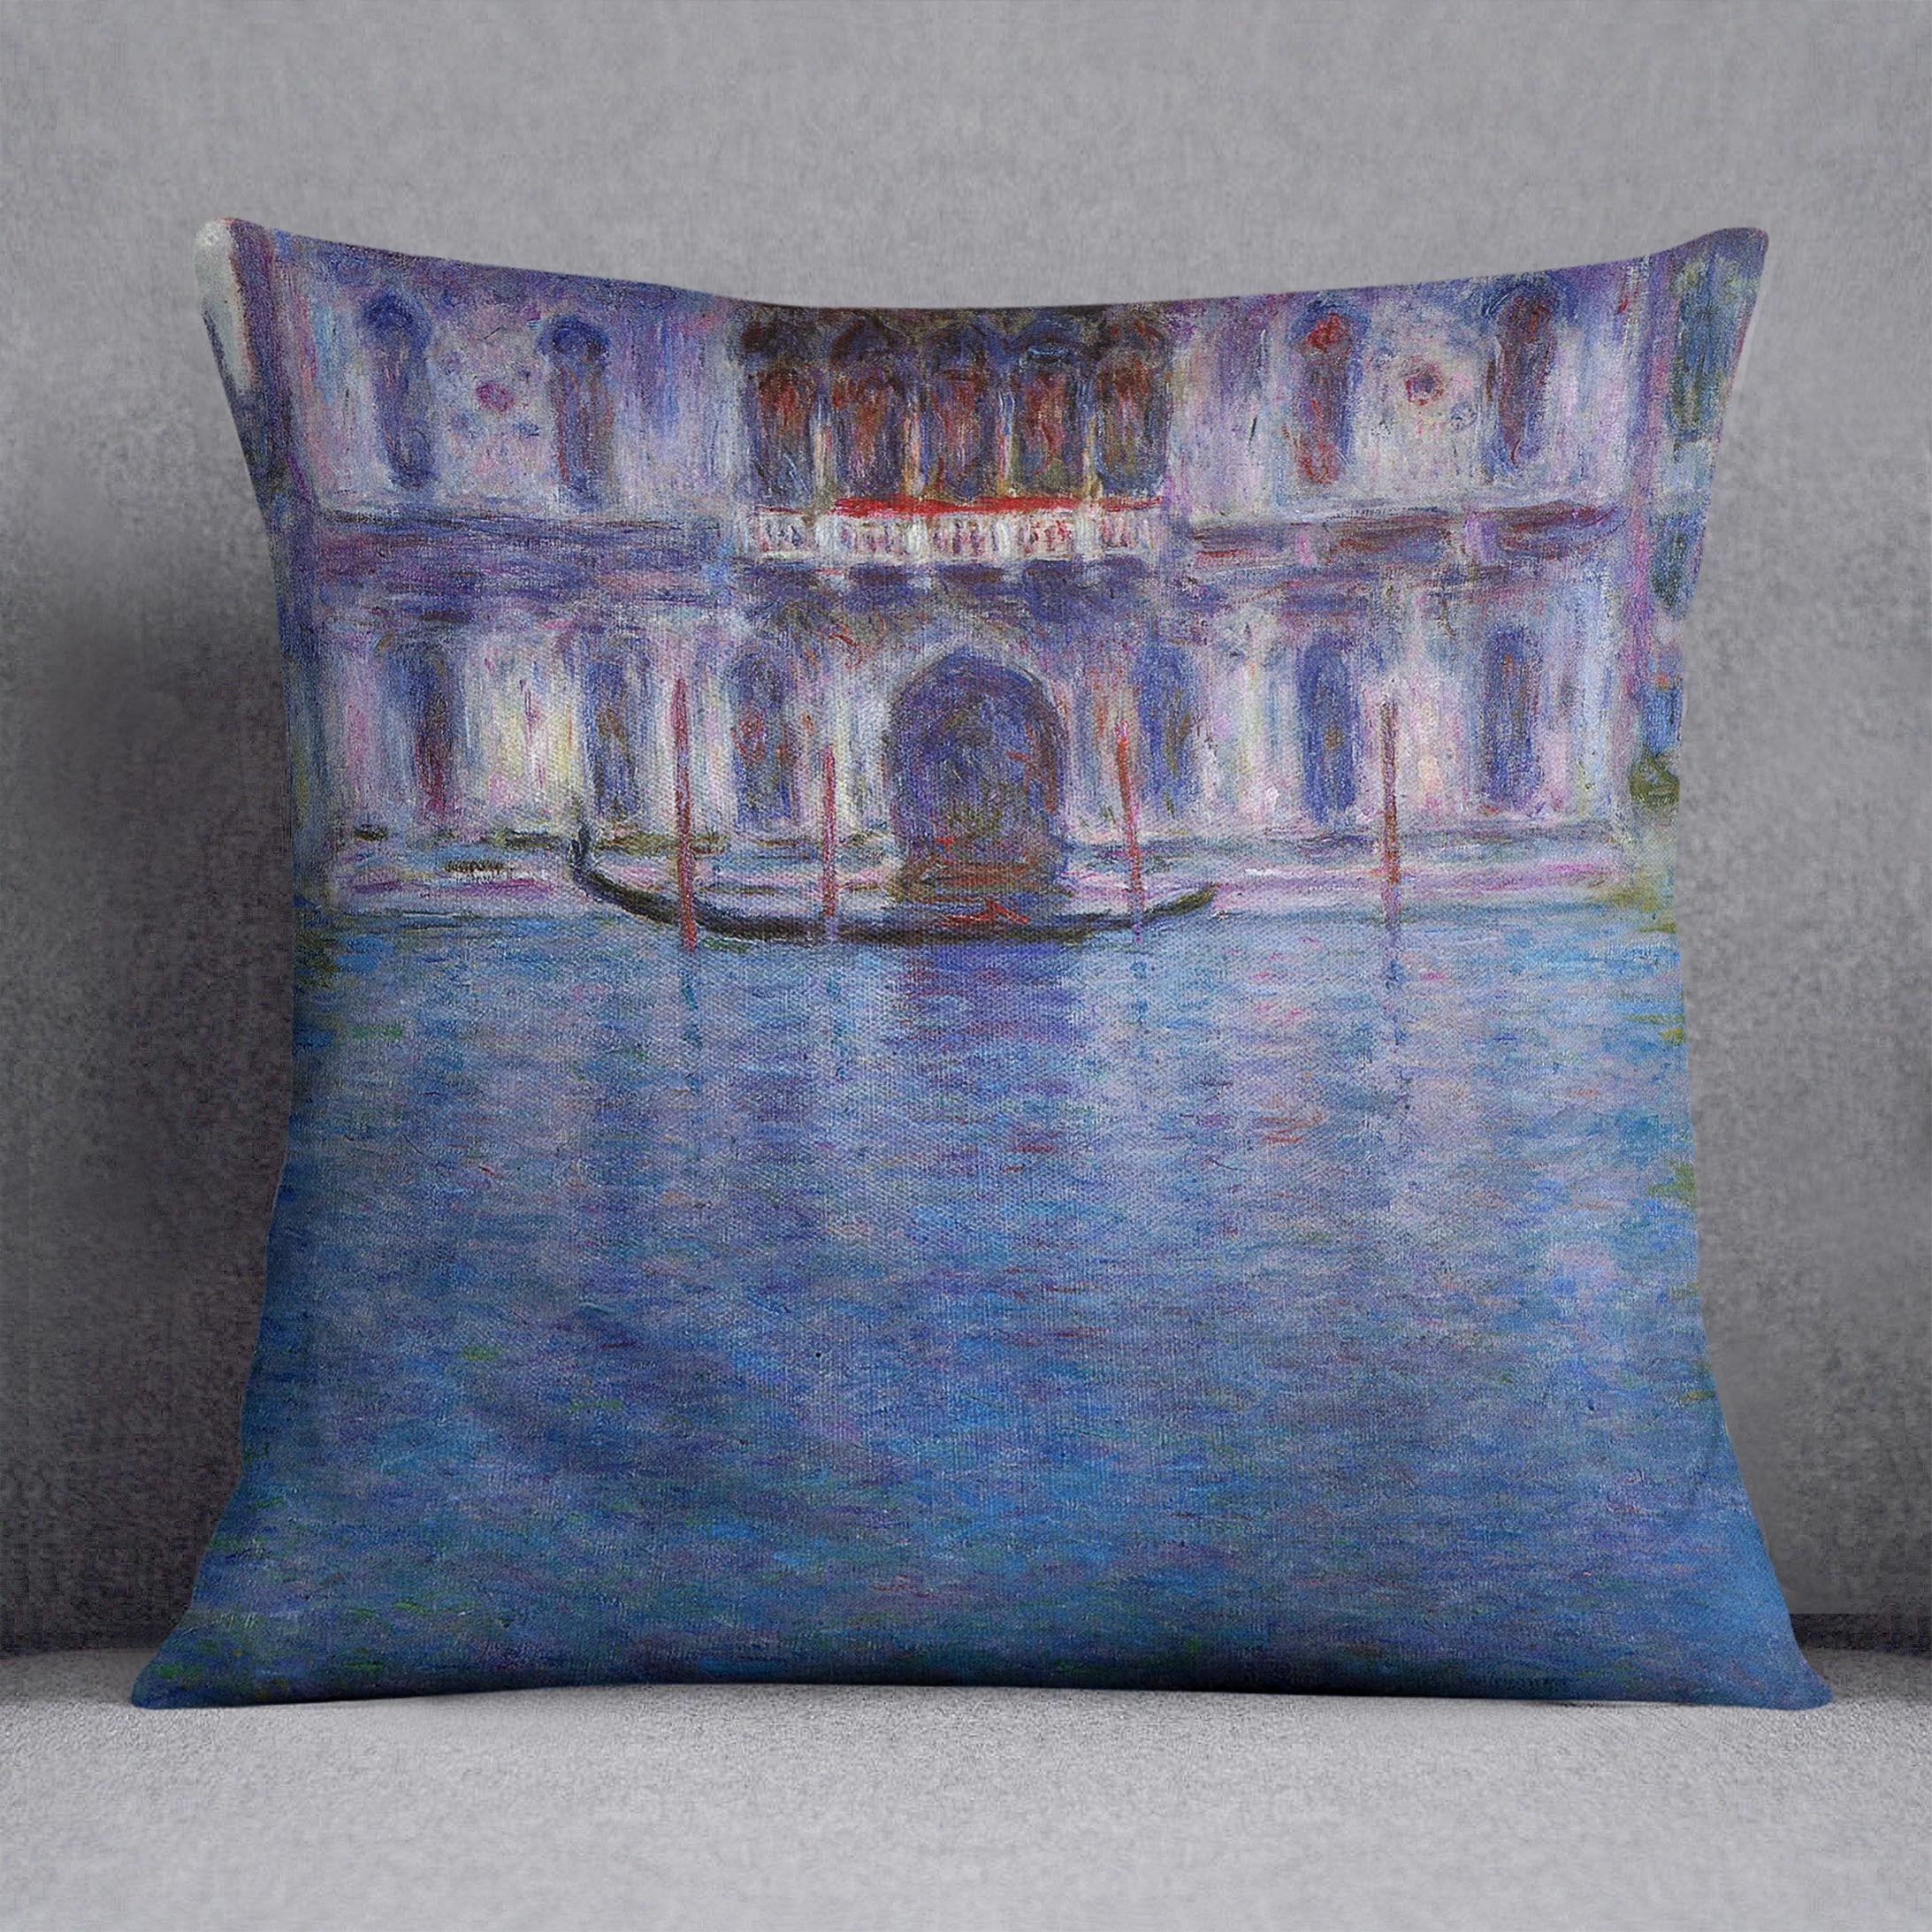 Palazzo 1 by Monet Throw Pillow